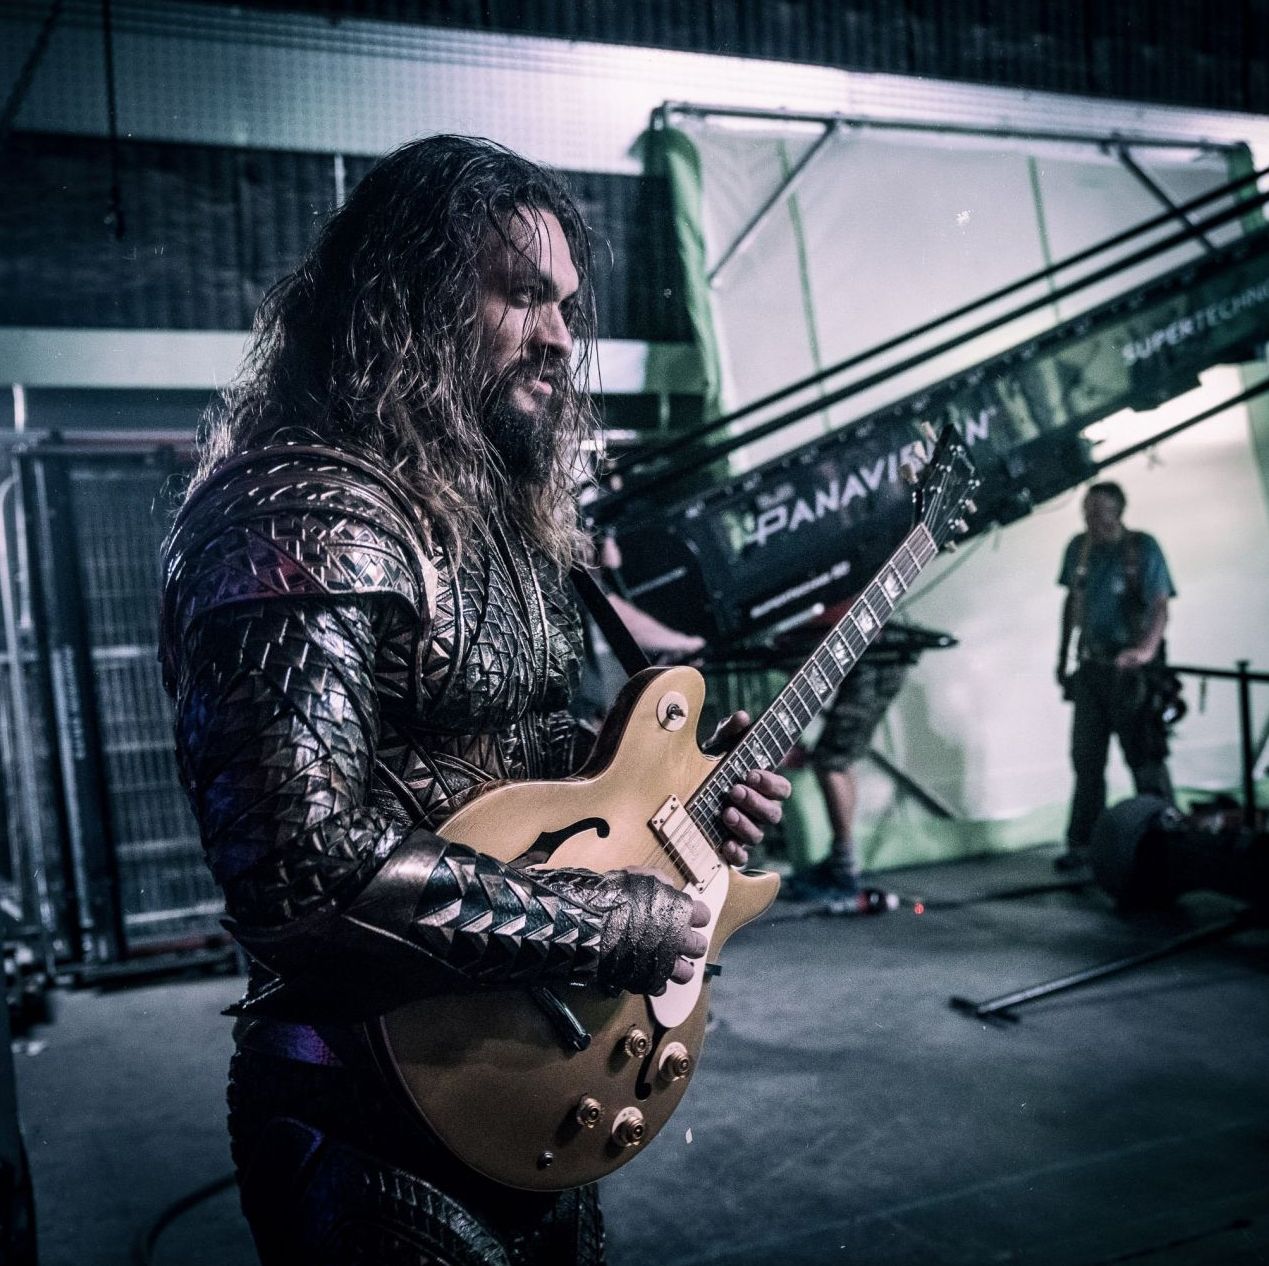 New image of Jason Momoa as Aquaman from the set of &#039;Justice